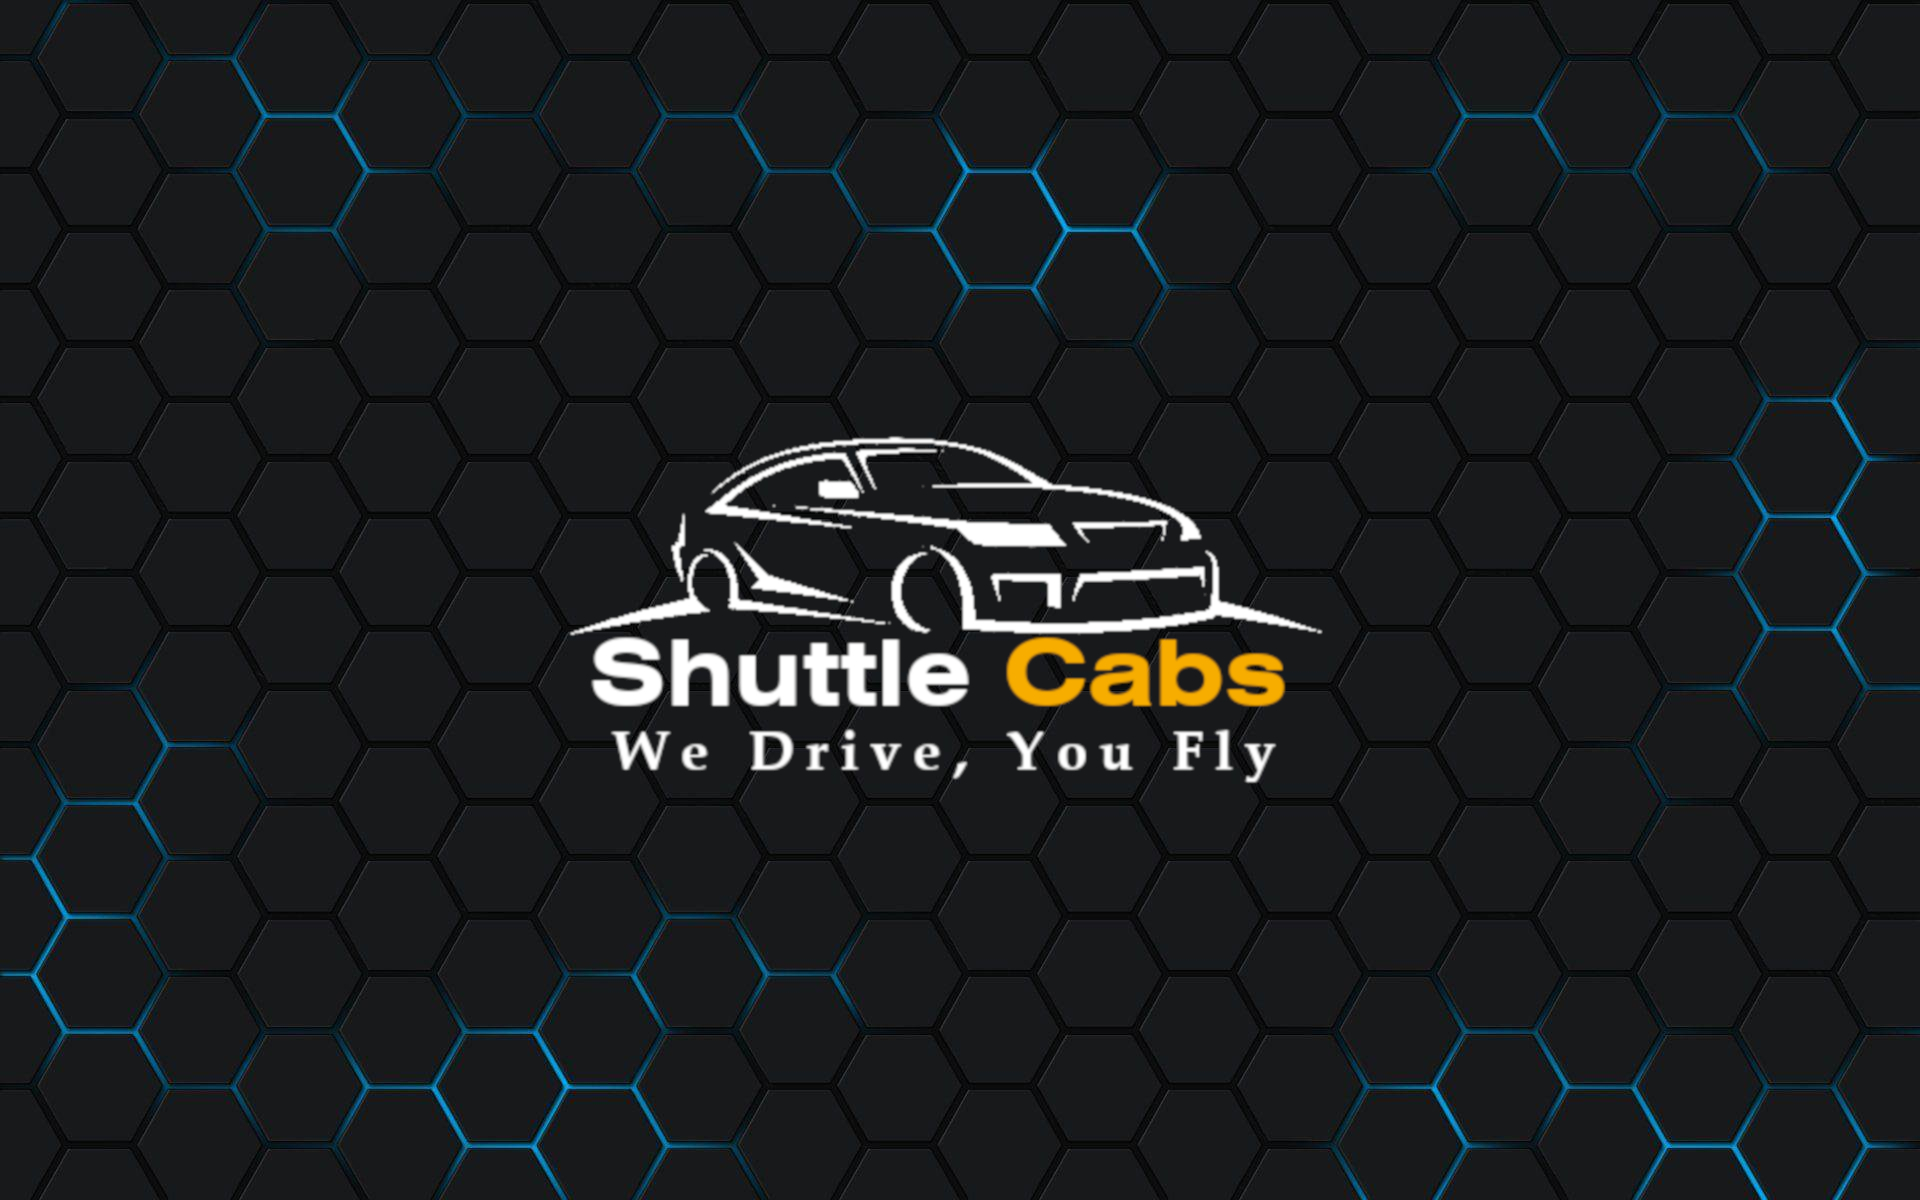 Shuttle Cabs